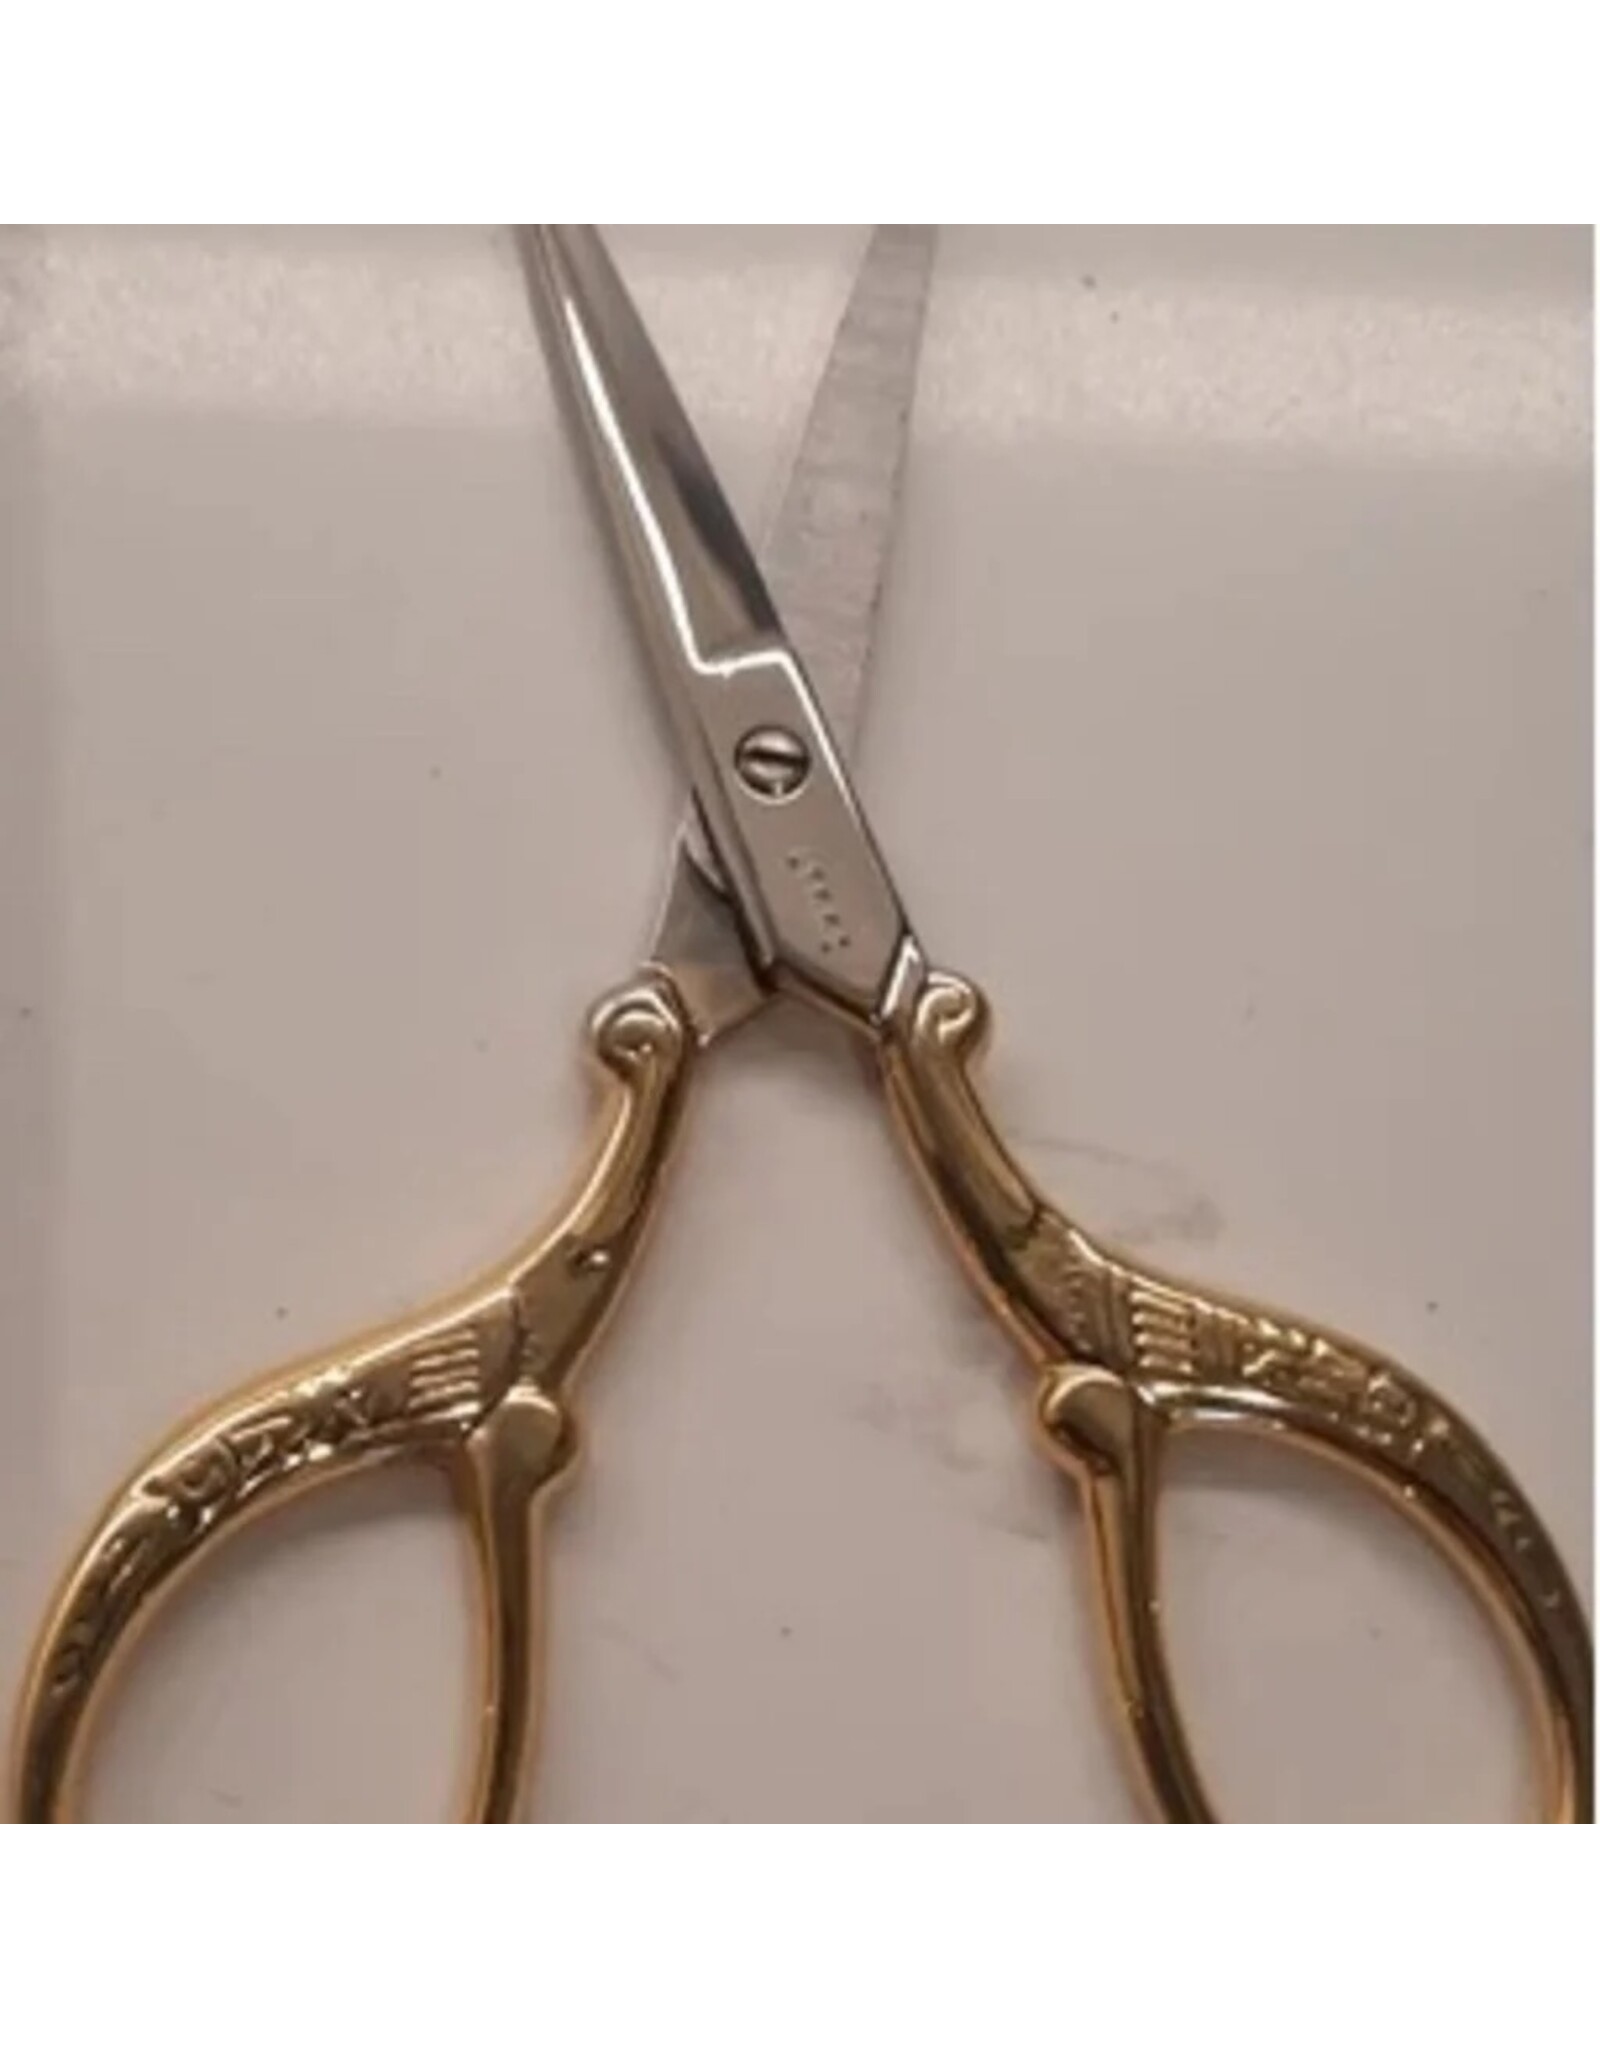 Lykke Lykke 24-Carat Gold Plated Embroidery Scissors